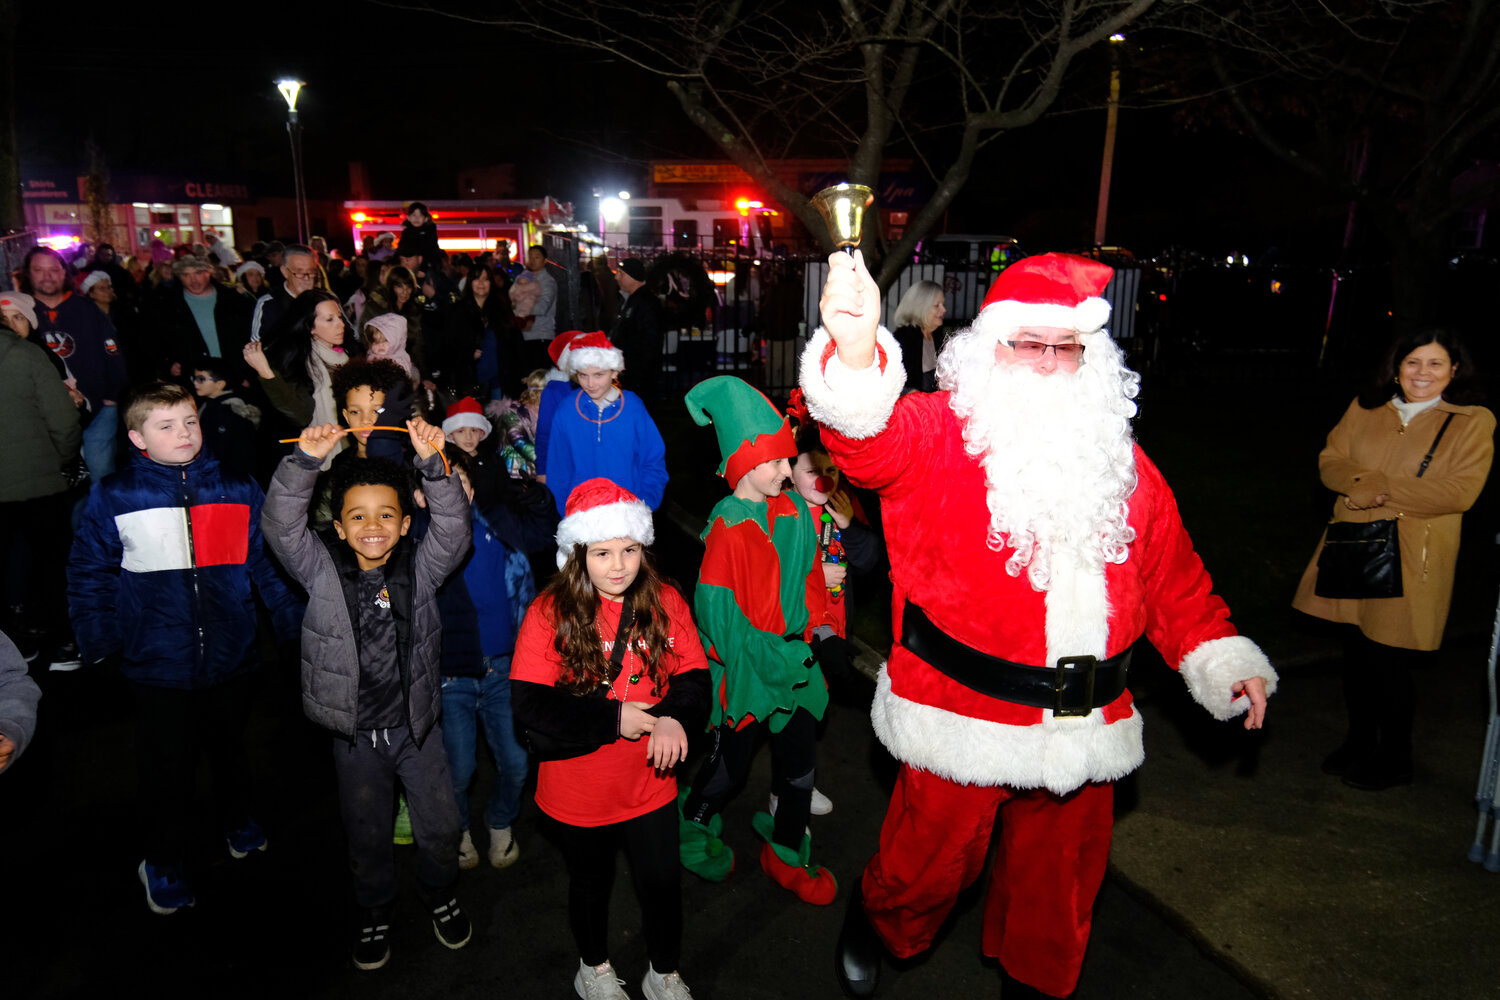 Kids in the Franklin Square and surrounding communities meet Santa at the Community League of Garden City South’s sixth annual Christmas tree lighting ceremony.